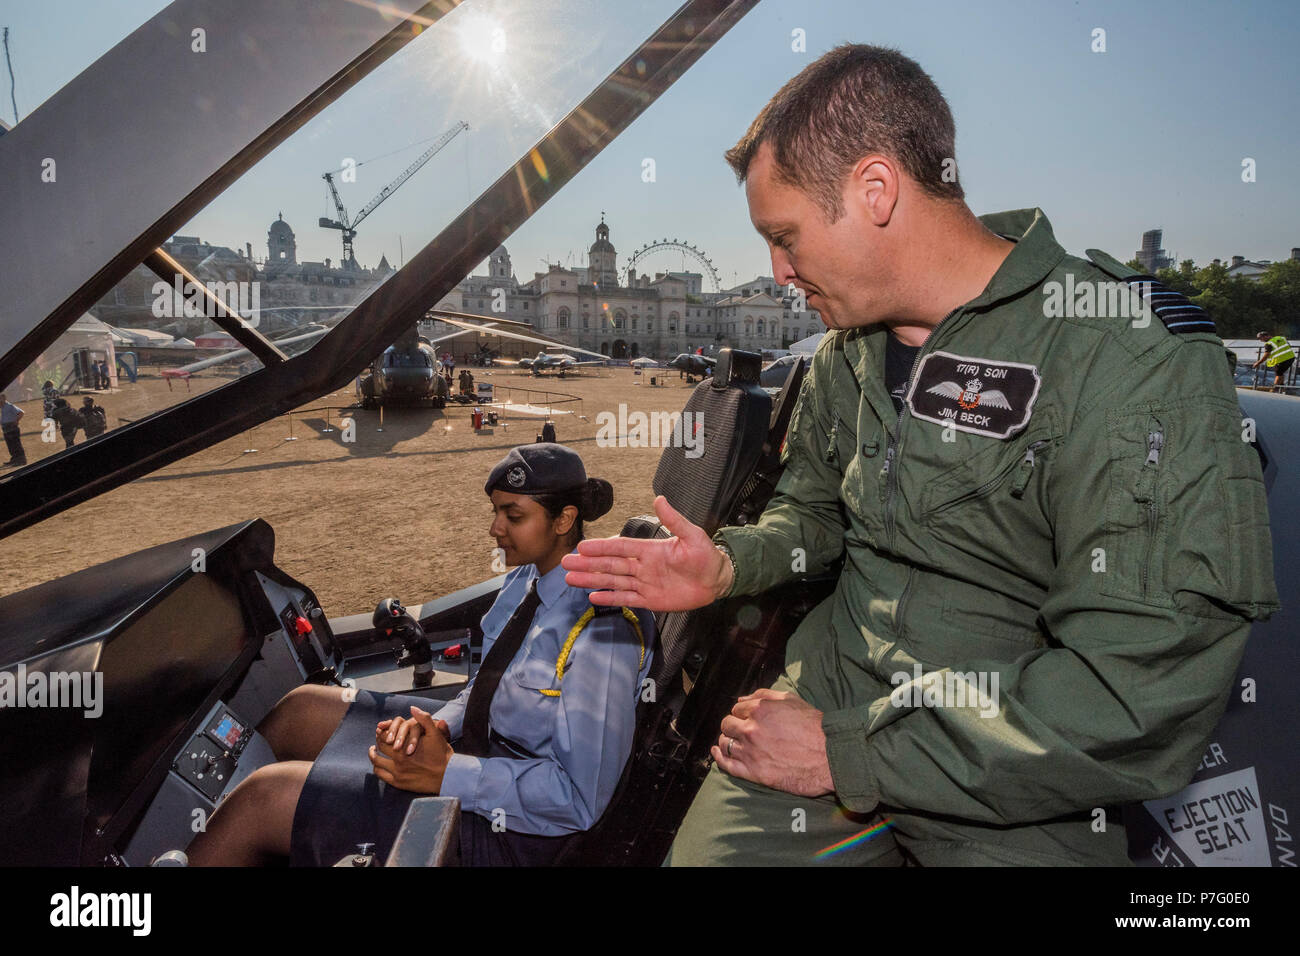 London, UK. 6th July 2018. Cadet CWO Shiva Bersavel and Grp Cpt Jim Beck on the F35-B Lightning IIBritain’s new, state-of-the-art stealth combat aircraft - RAF 100, Horse Guards Parade. As part of the 100th Anniversary celebrations of the Royal Air Force, an exhibition of aircraft covering the RAF’s history, from WW1 and WW2 through to the modern age. Credit: Guy Bell/Alamy Live News Stock Photo